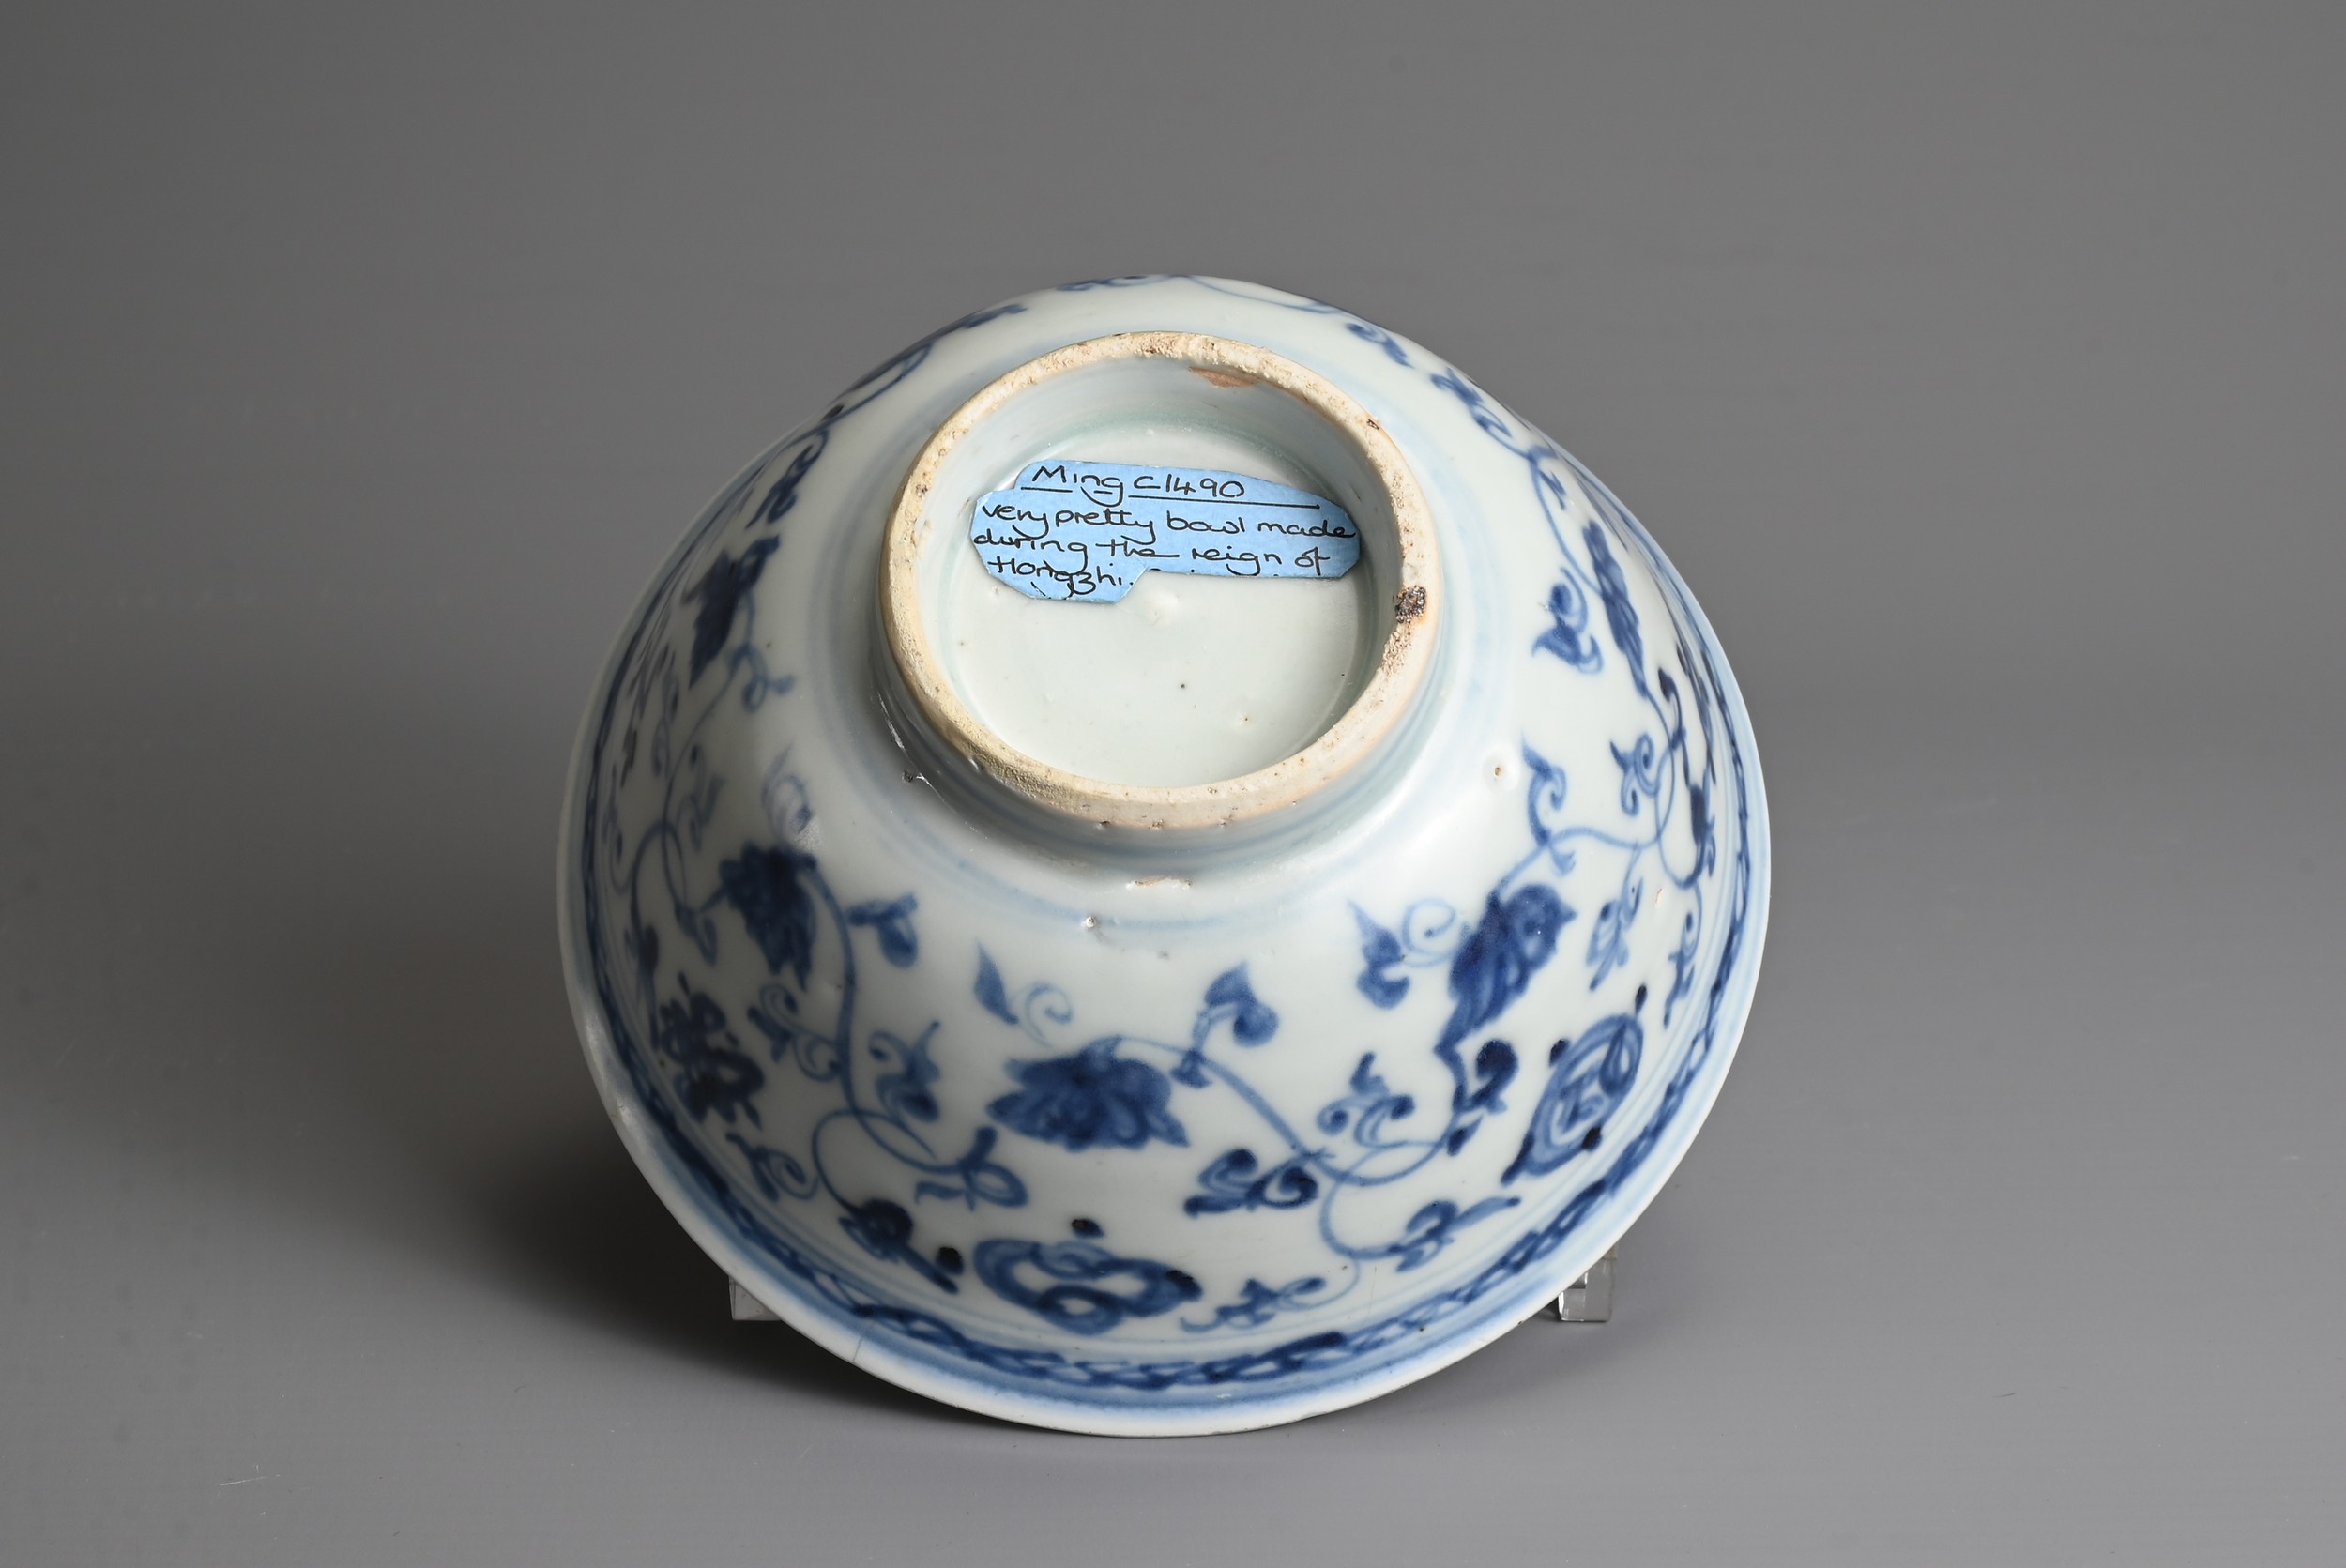 A CHINESE BLUE AND WHITE PORCELAIN BOWL, MING DYNASTY. Decorated with lotus scrolls and Buddhist - Image 5 of 7